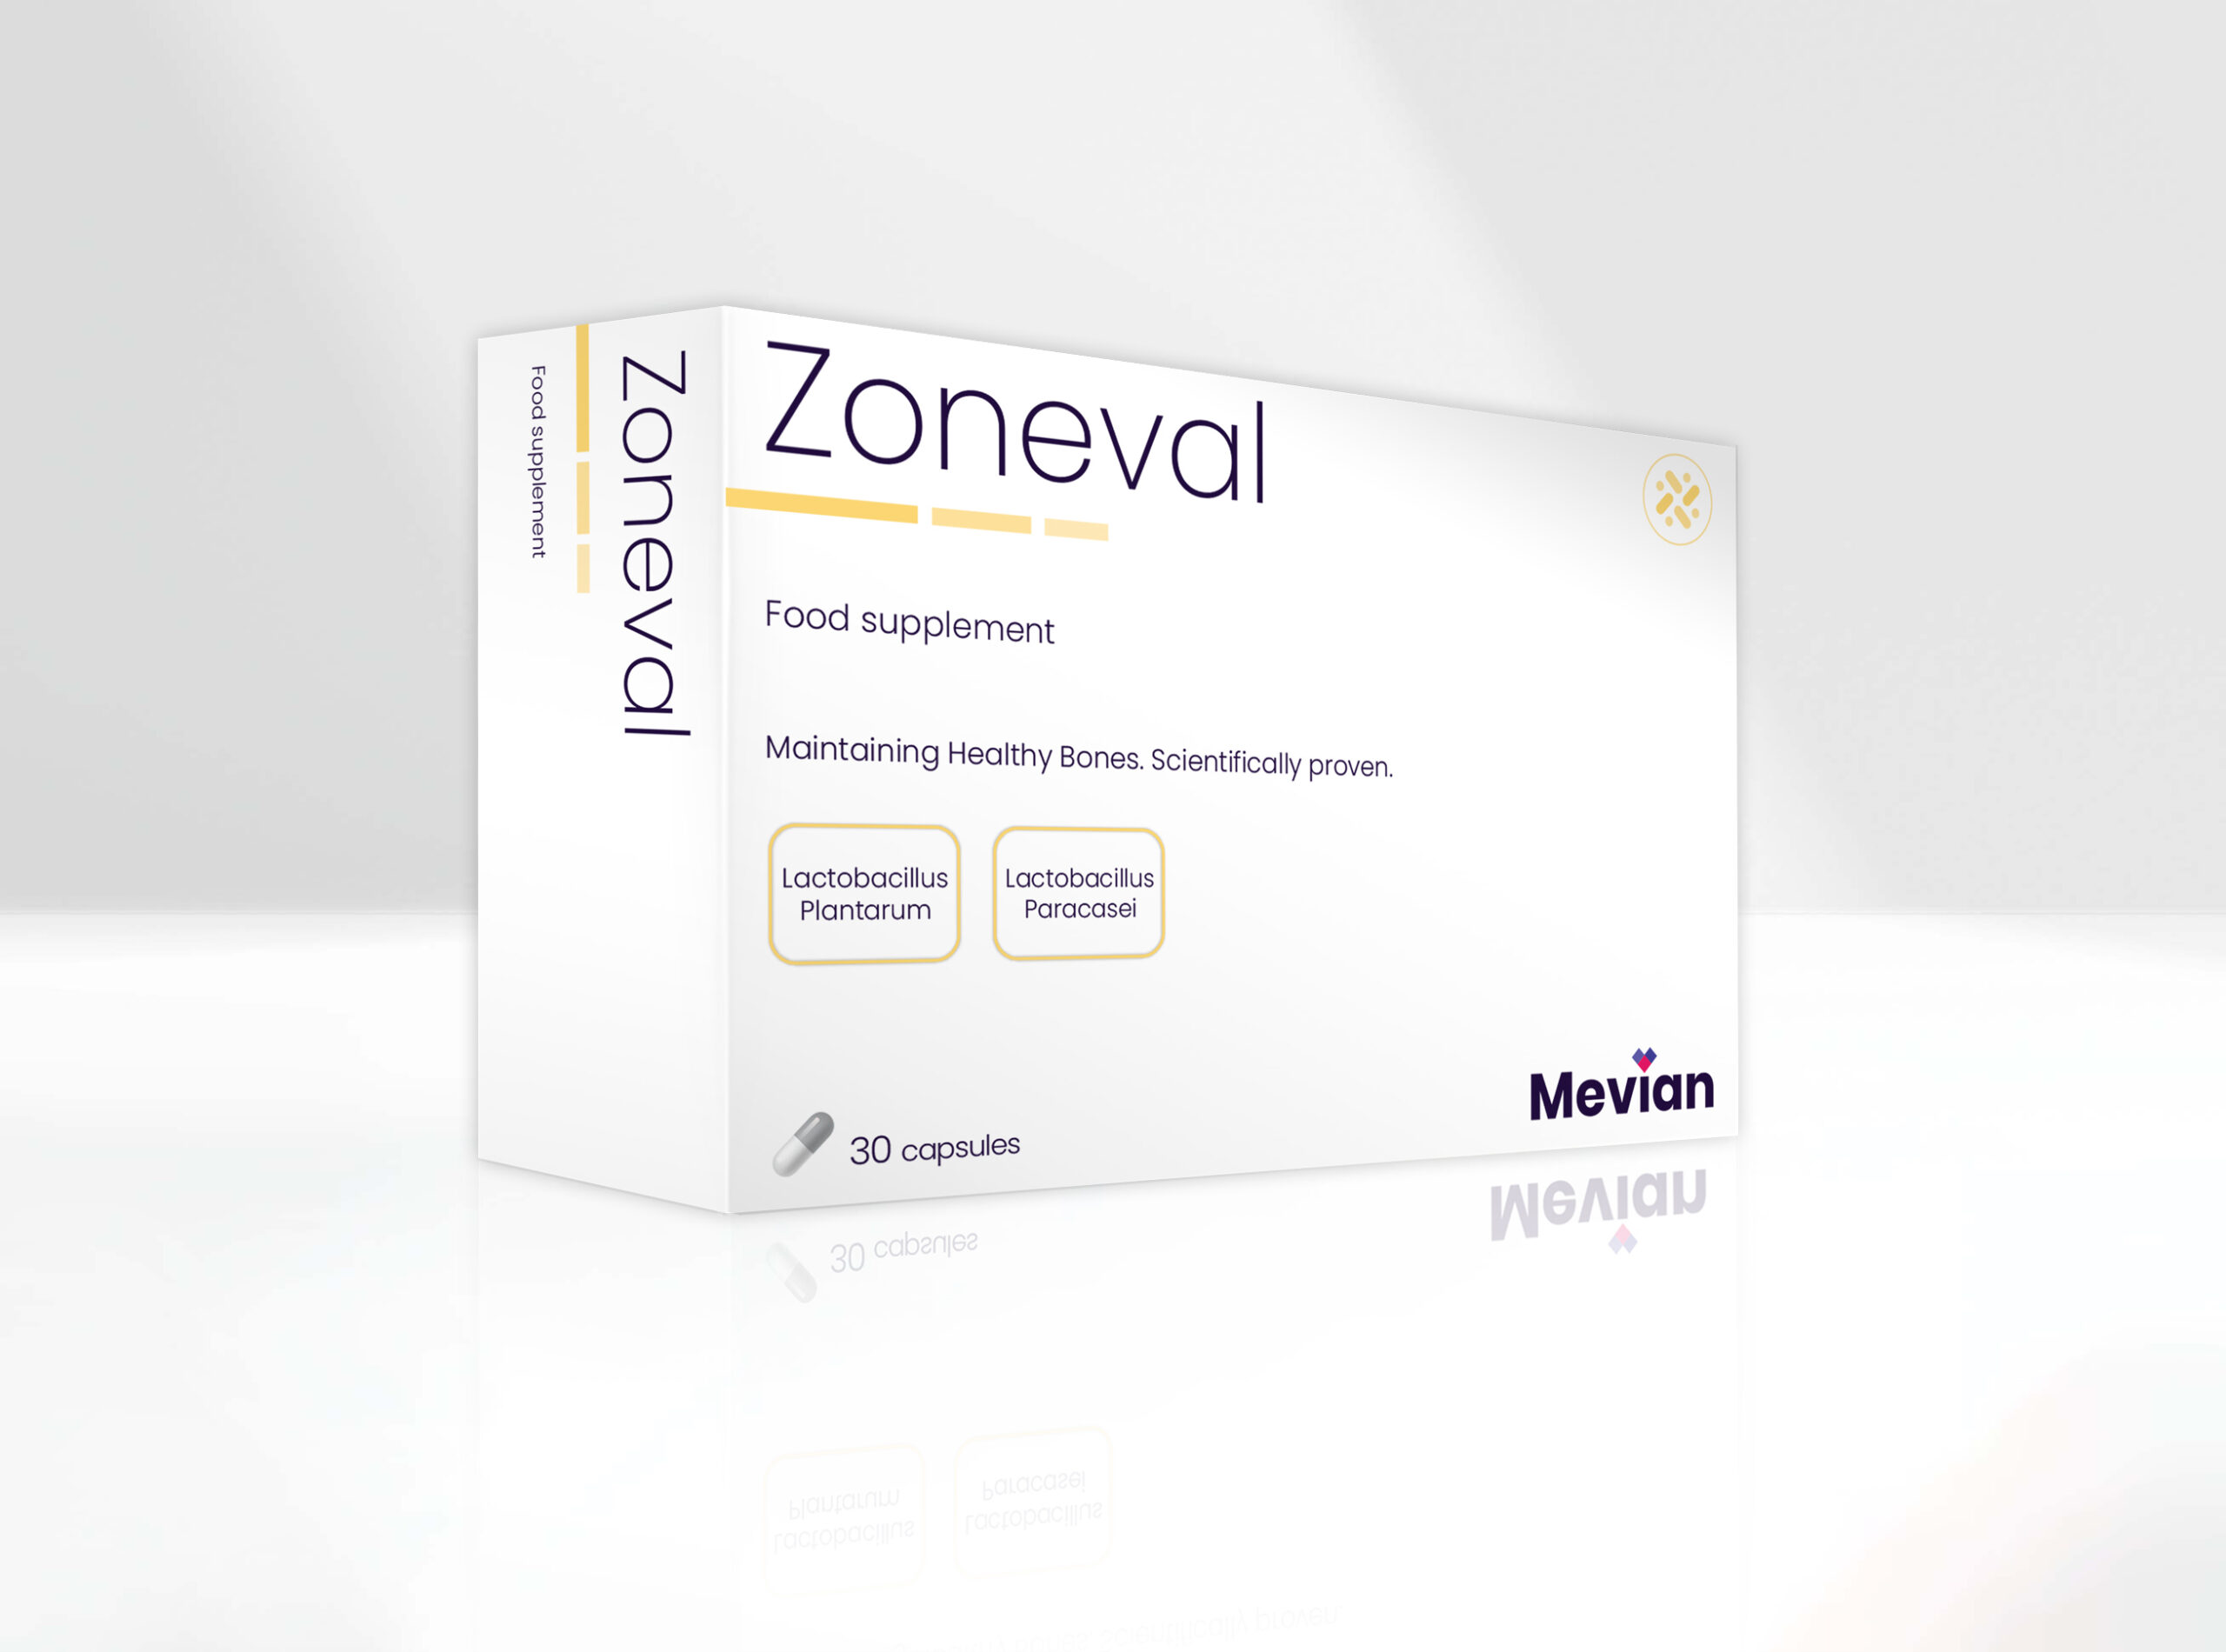 Zoneval improves bone mineral density and delaying the process of bone degeneration in adults that need support in bone health<br />
and osteopenia.